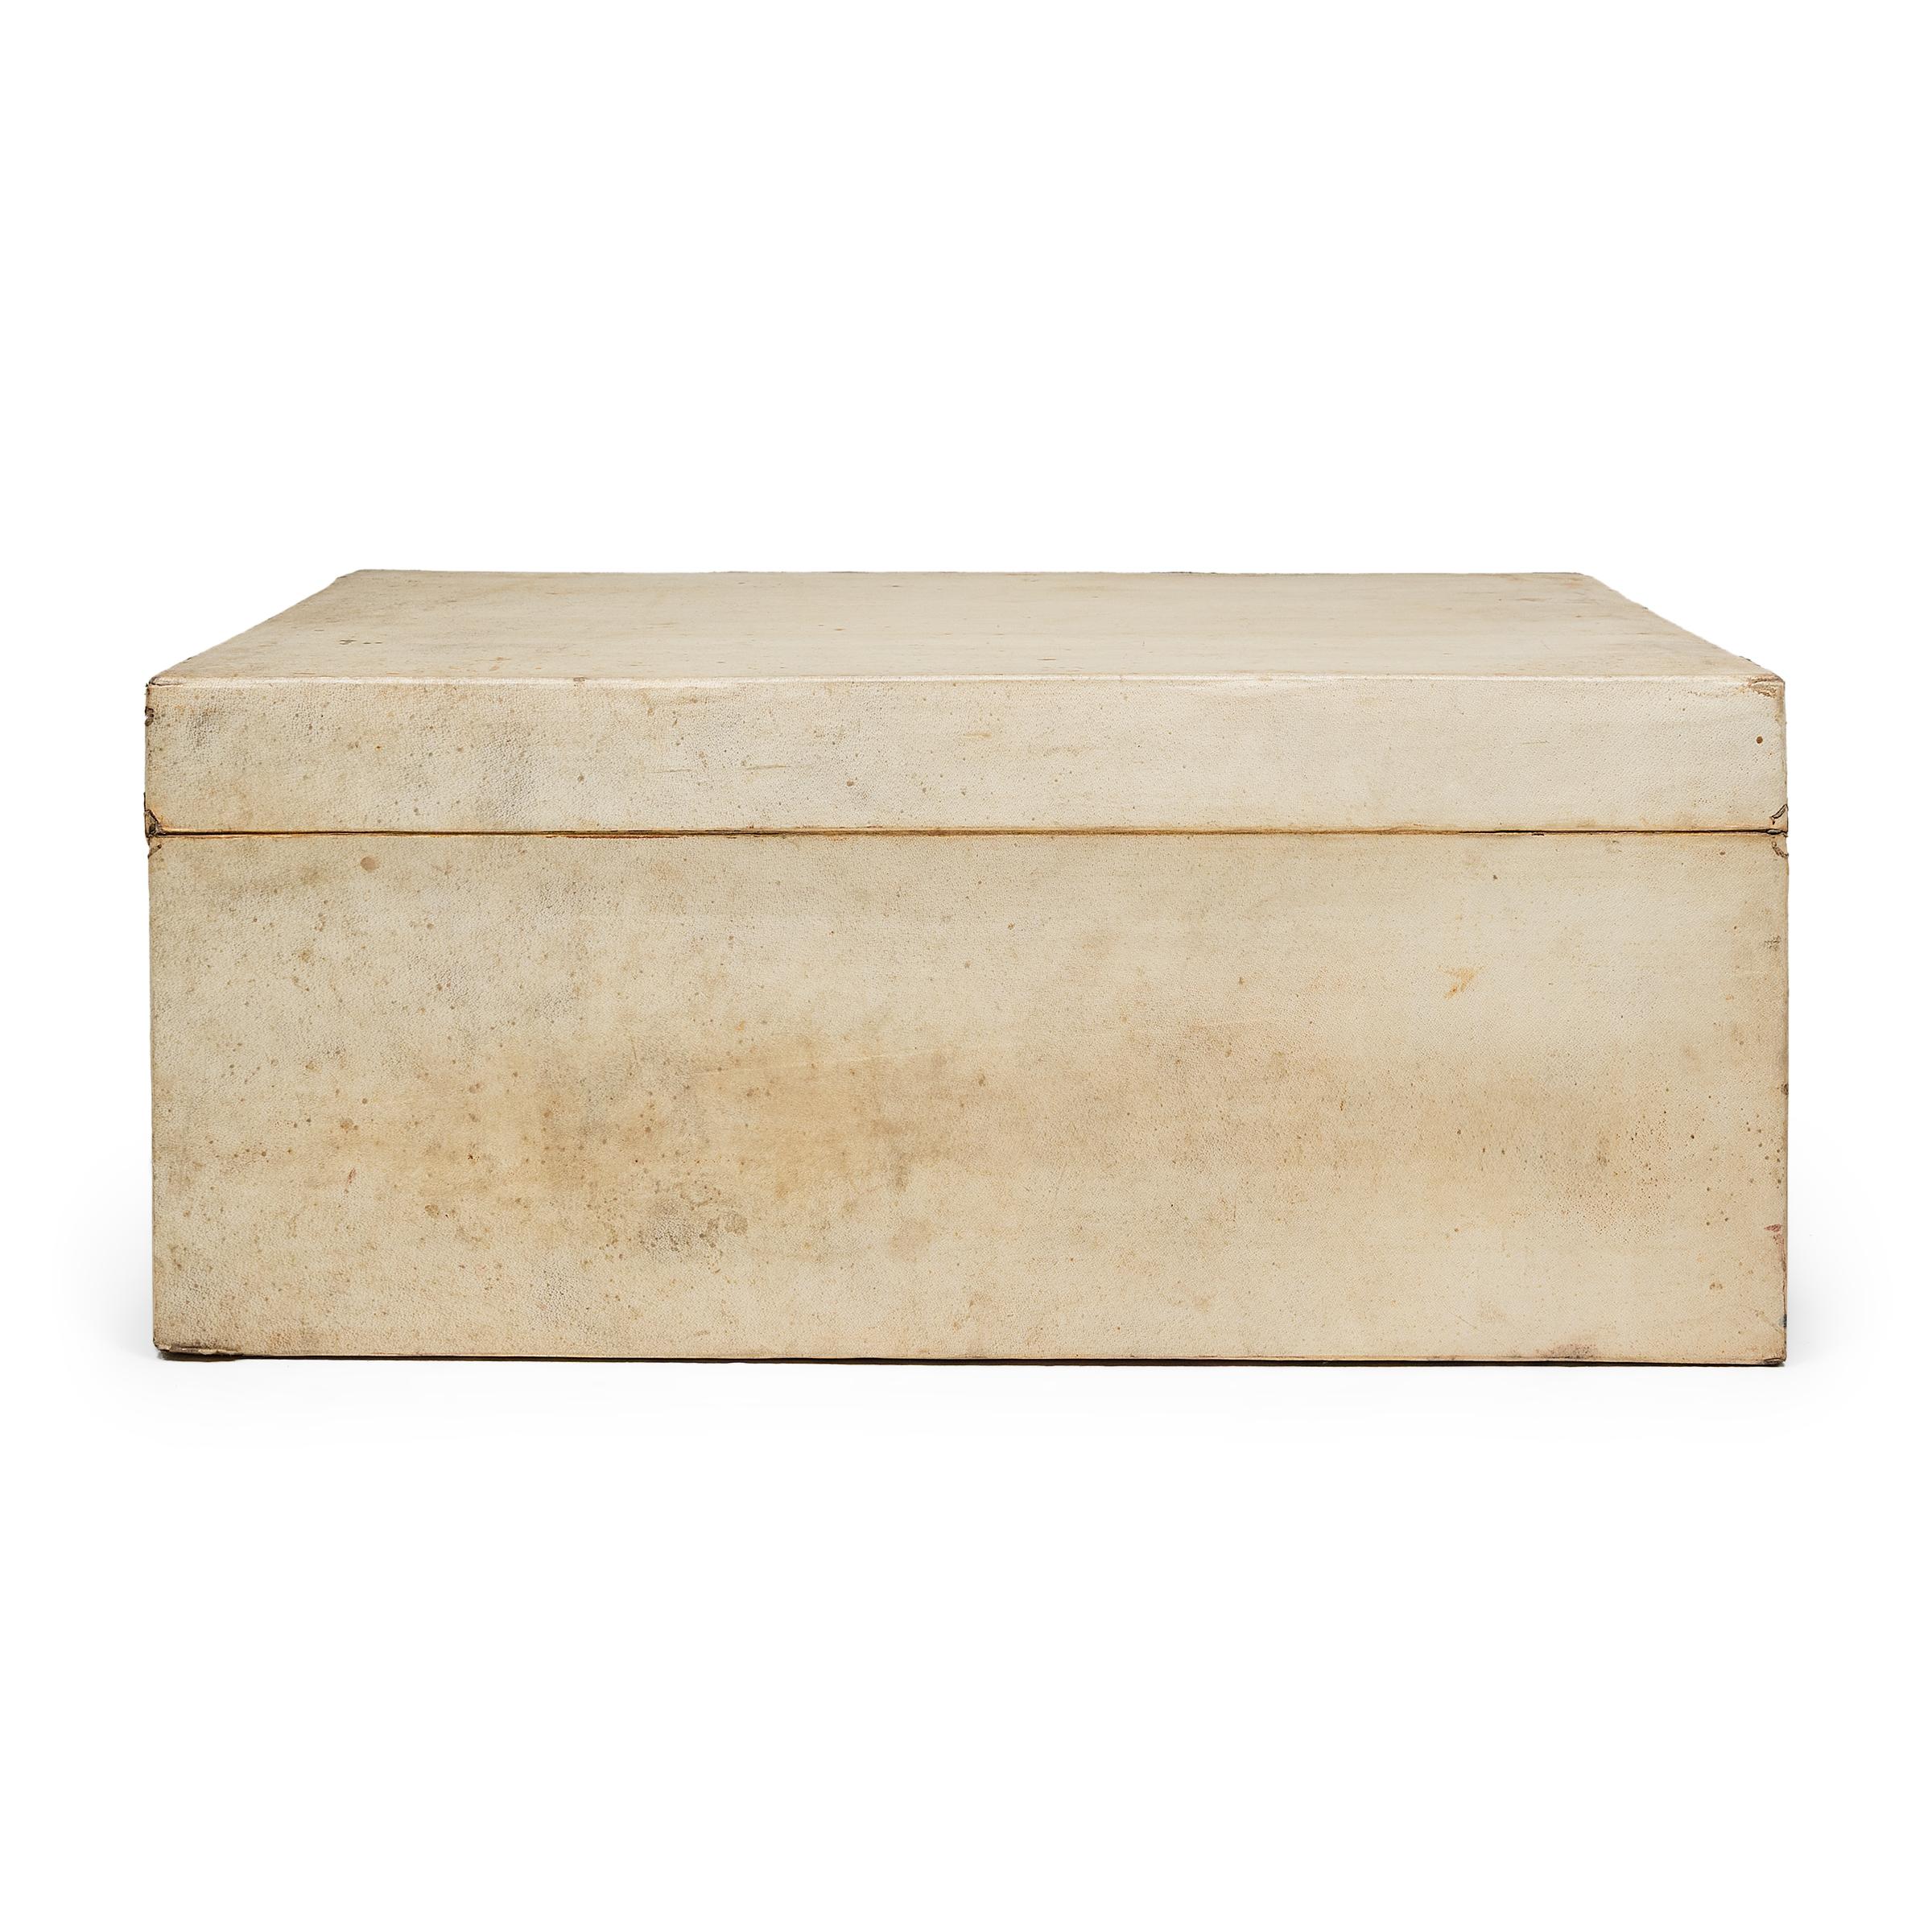 19th Century Chinese Blonde Hide Storage Trunk, c. 1800 For Sale